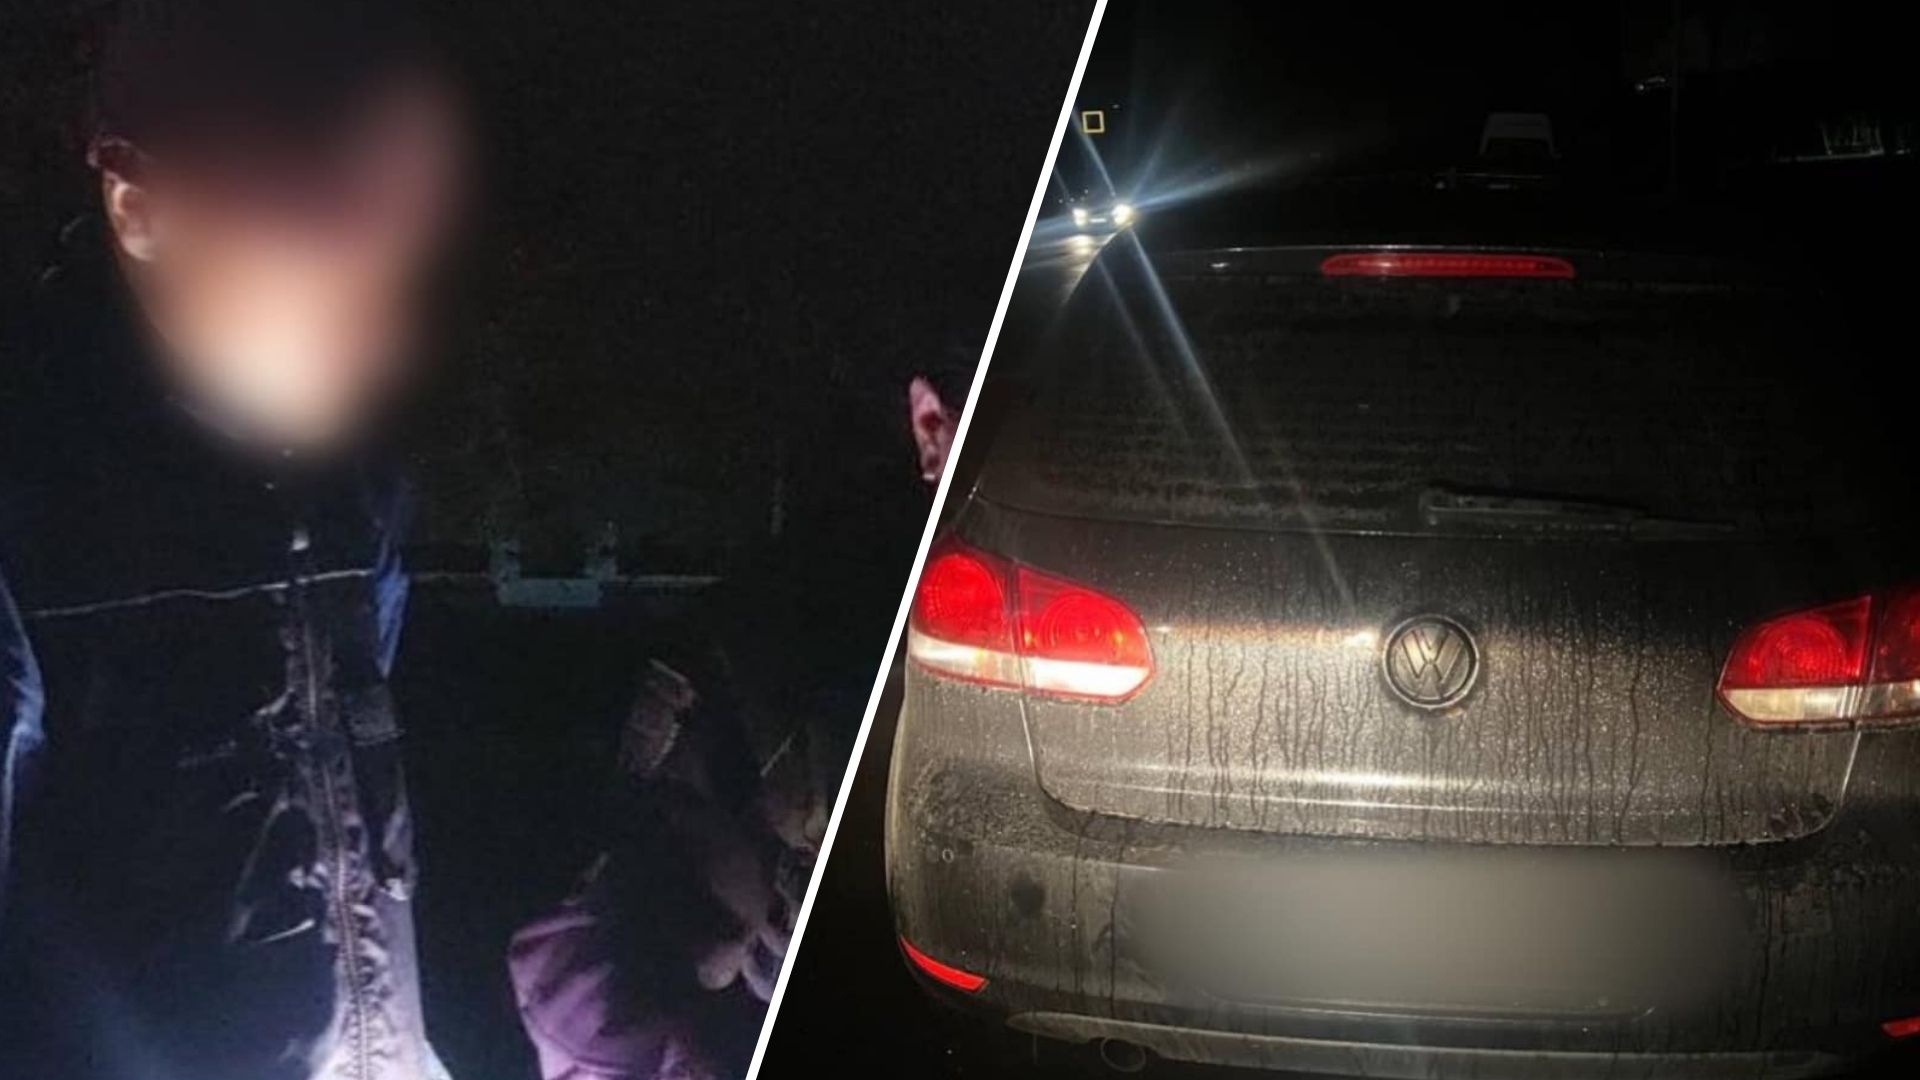 Today, at midnight, on Svoboda Avenue in Uzhgorod, the patrol police stopped the driver of a Volkswagen for violating traffic rules.